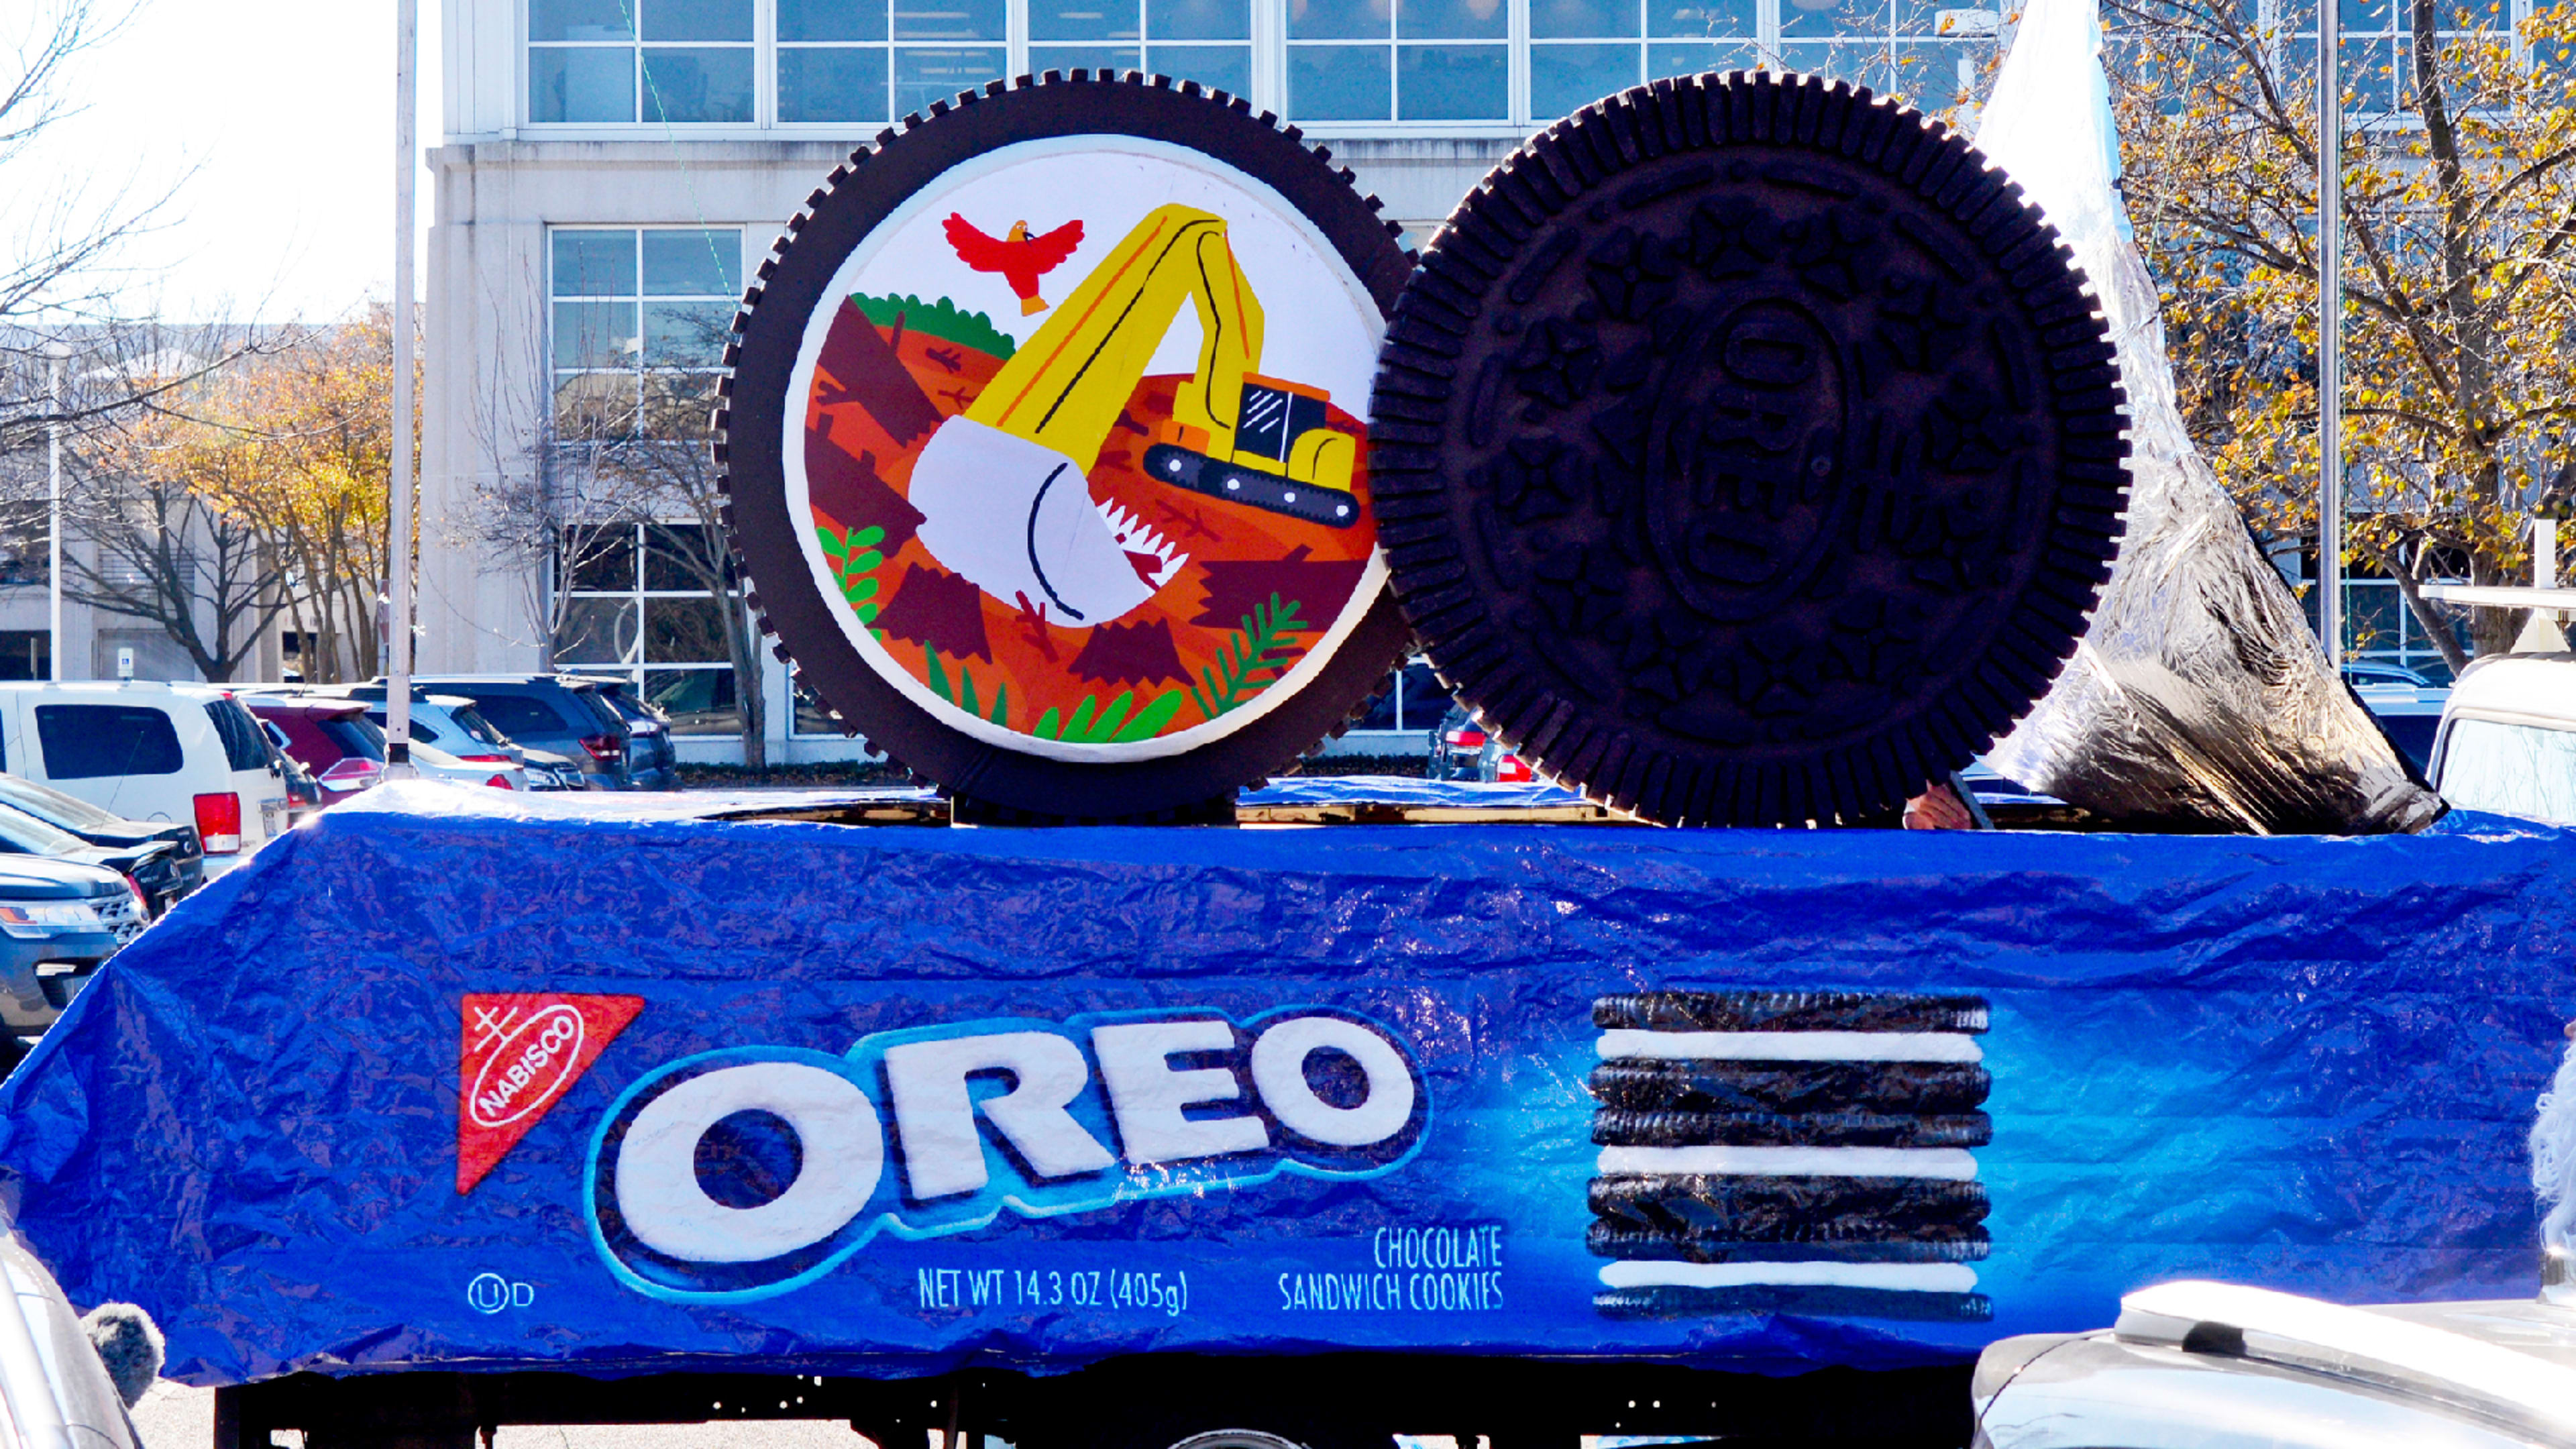 Greenpeace unveils a new Oreo flavor: Deforestation